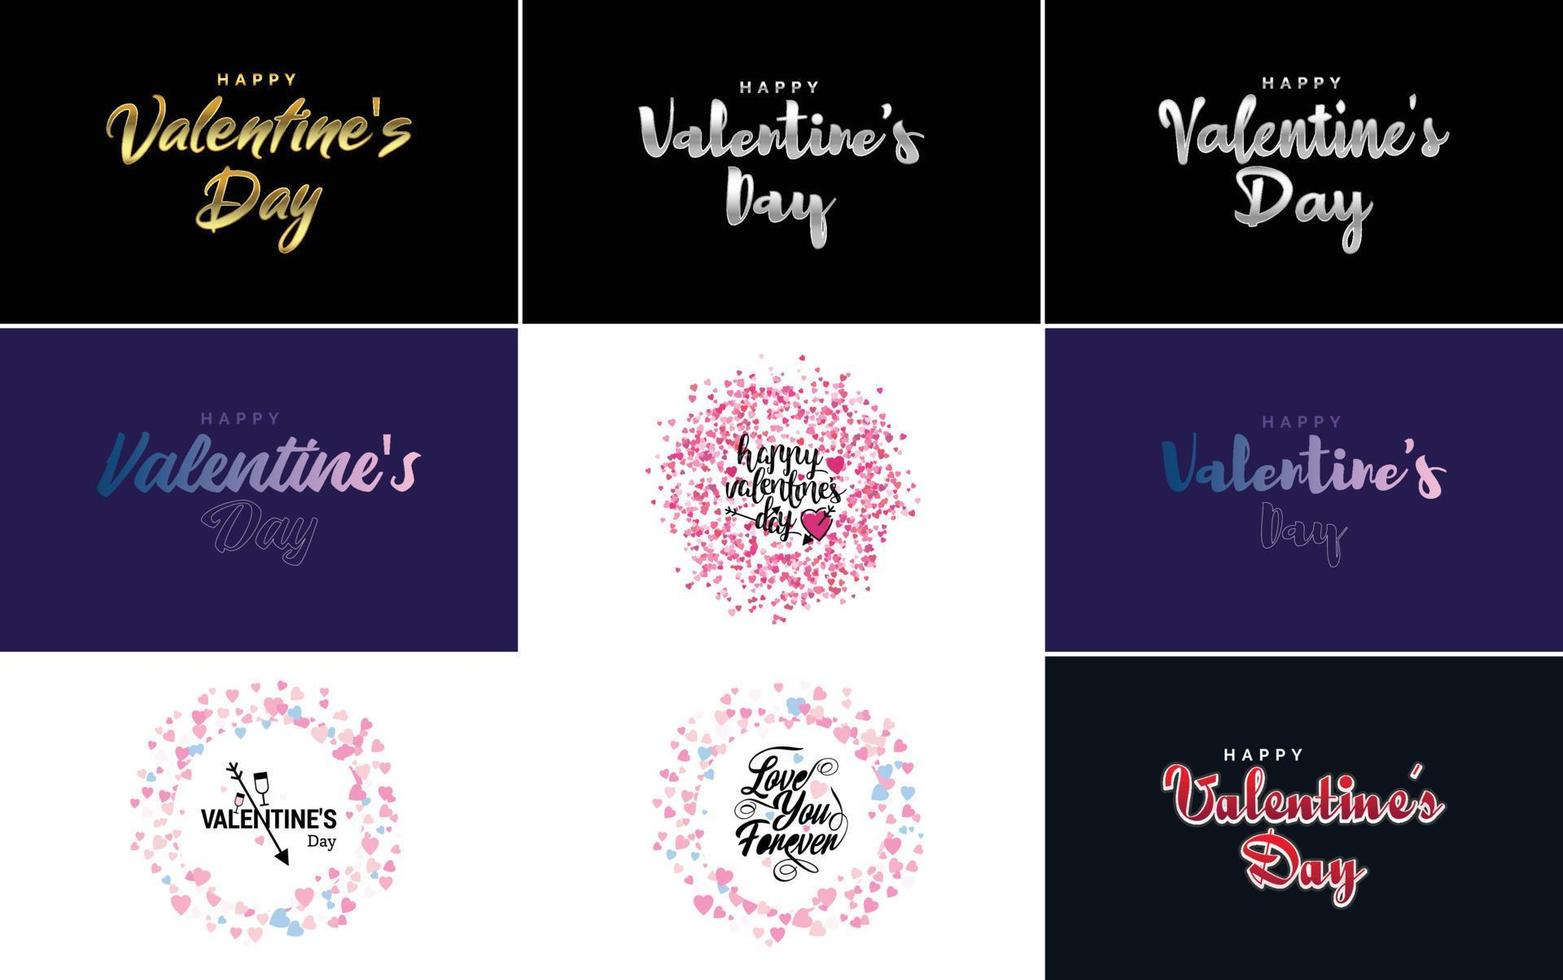 Happy Valentine's Day typography poster with handwritten calligraphy text. vector